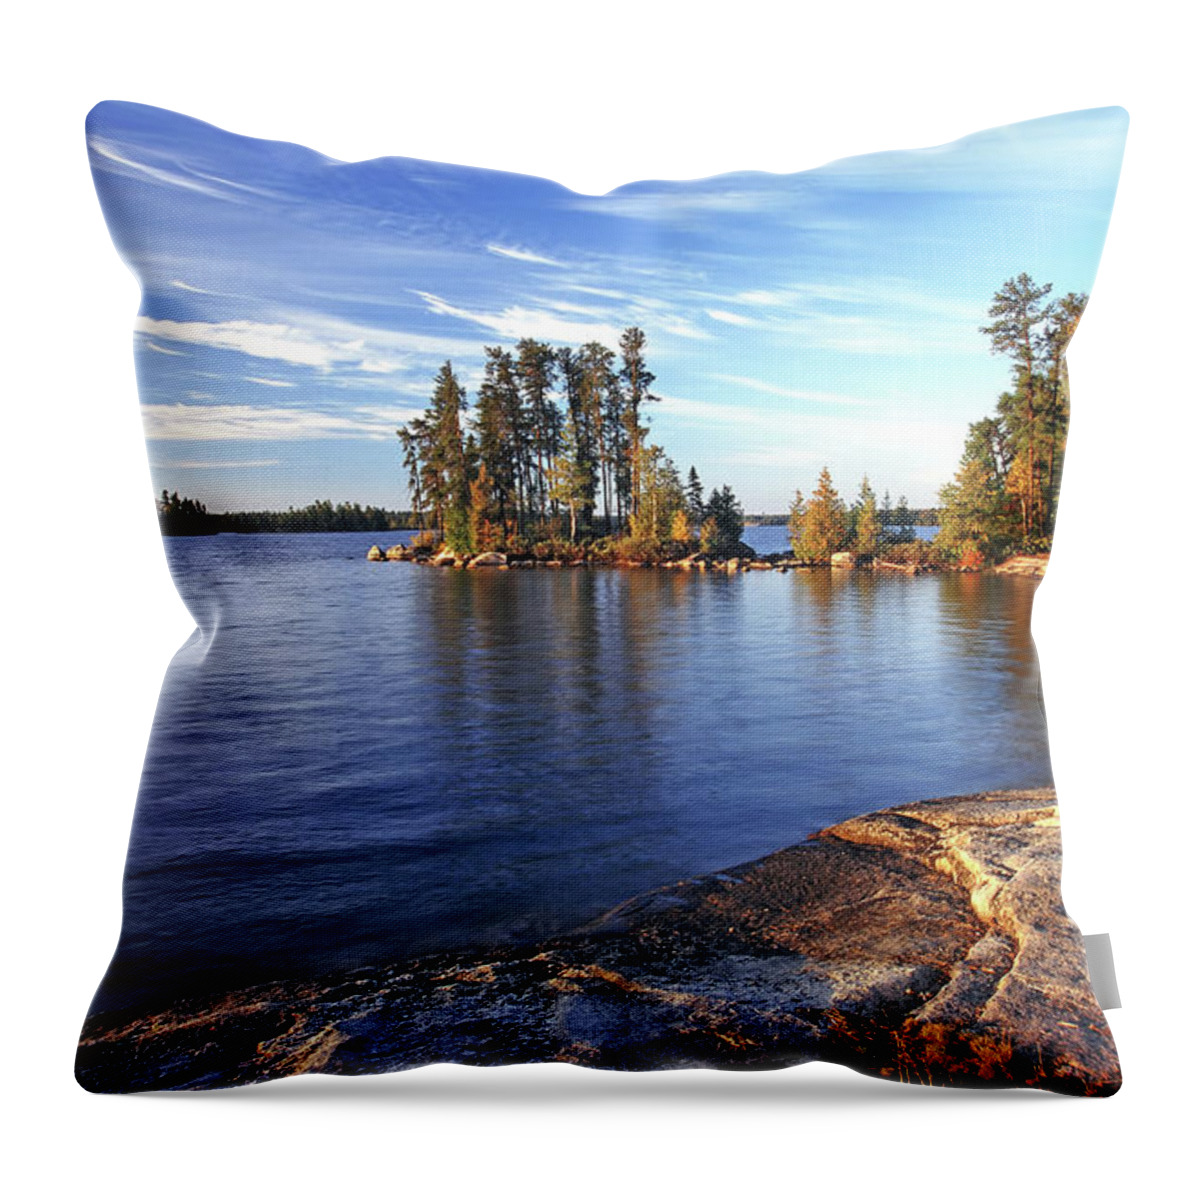 Autumn Colors Throw Pillow featuring the photograph Nym Lake Landing by Bill Morgenstern